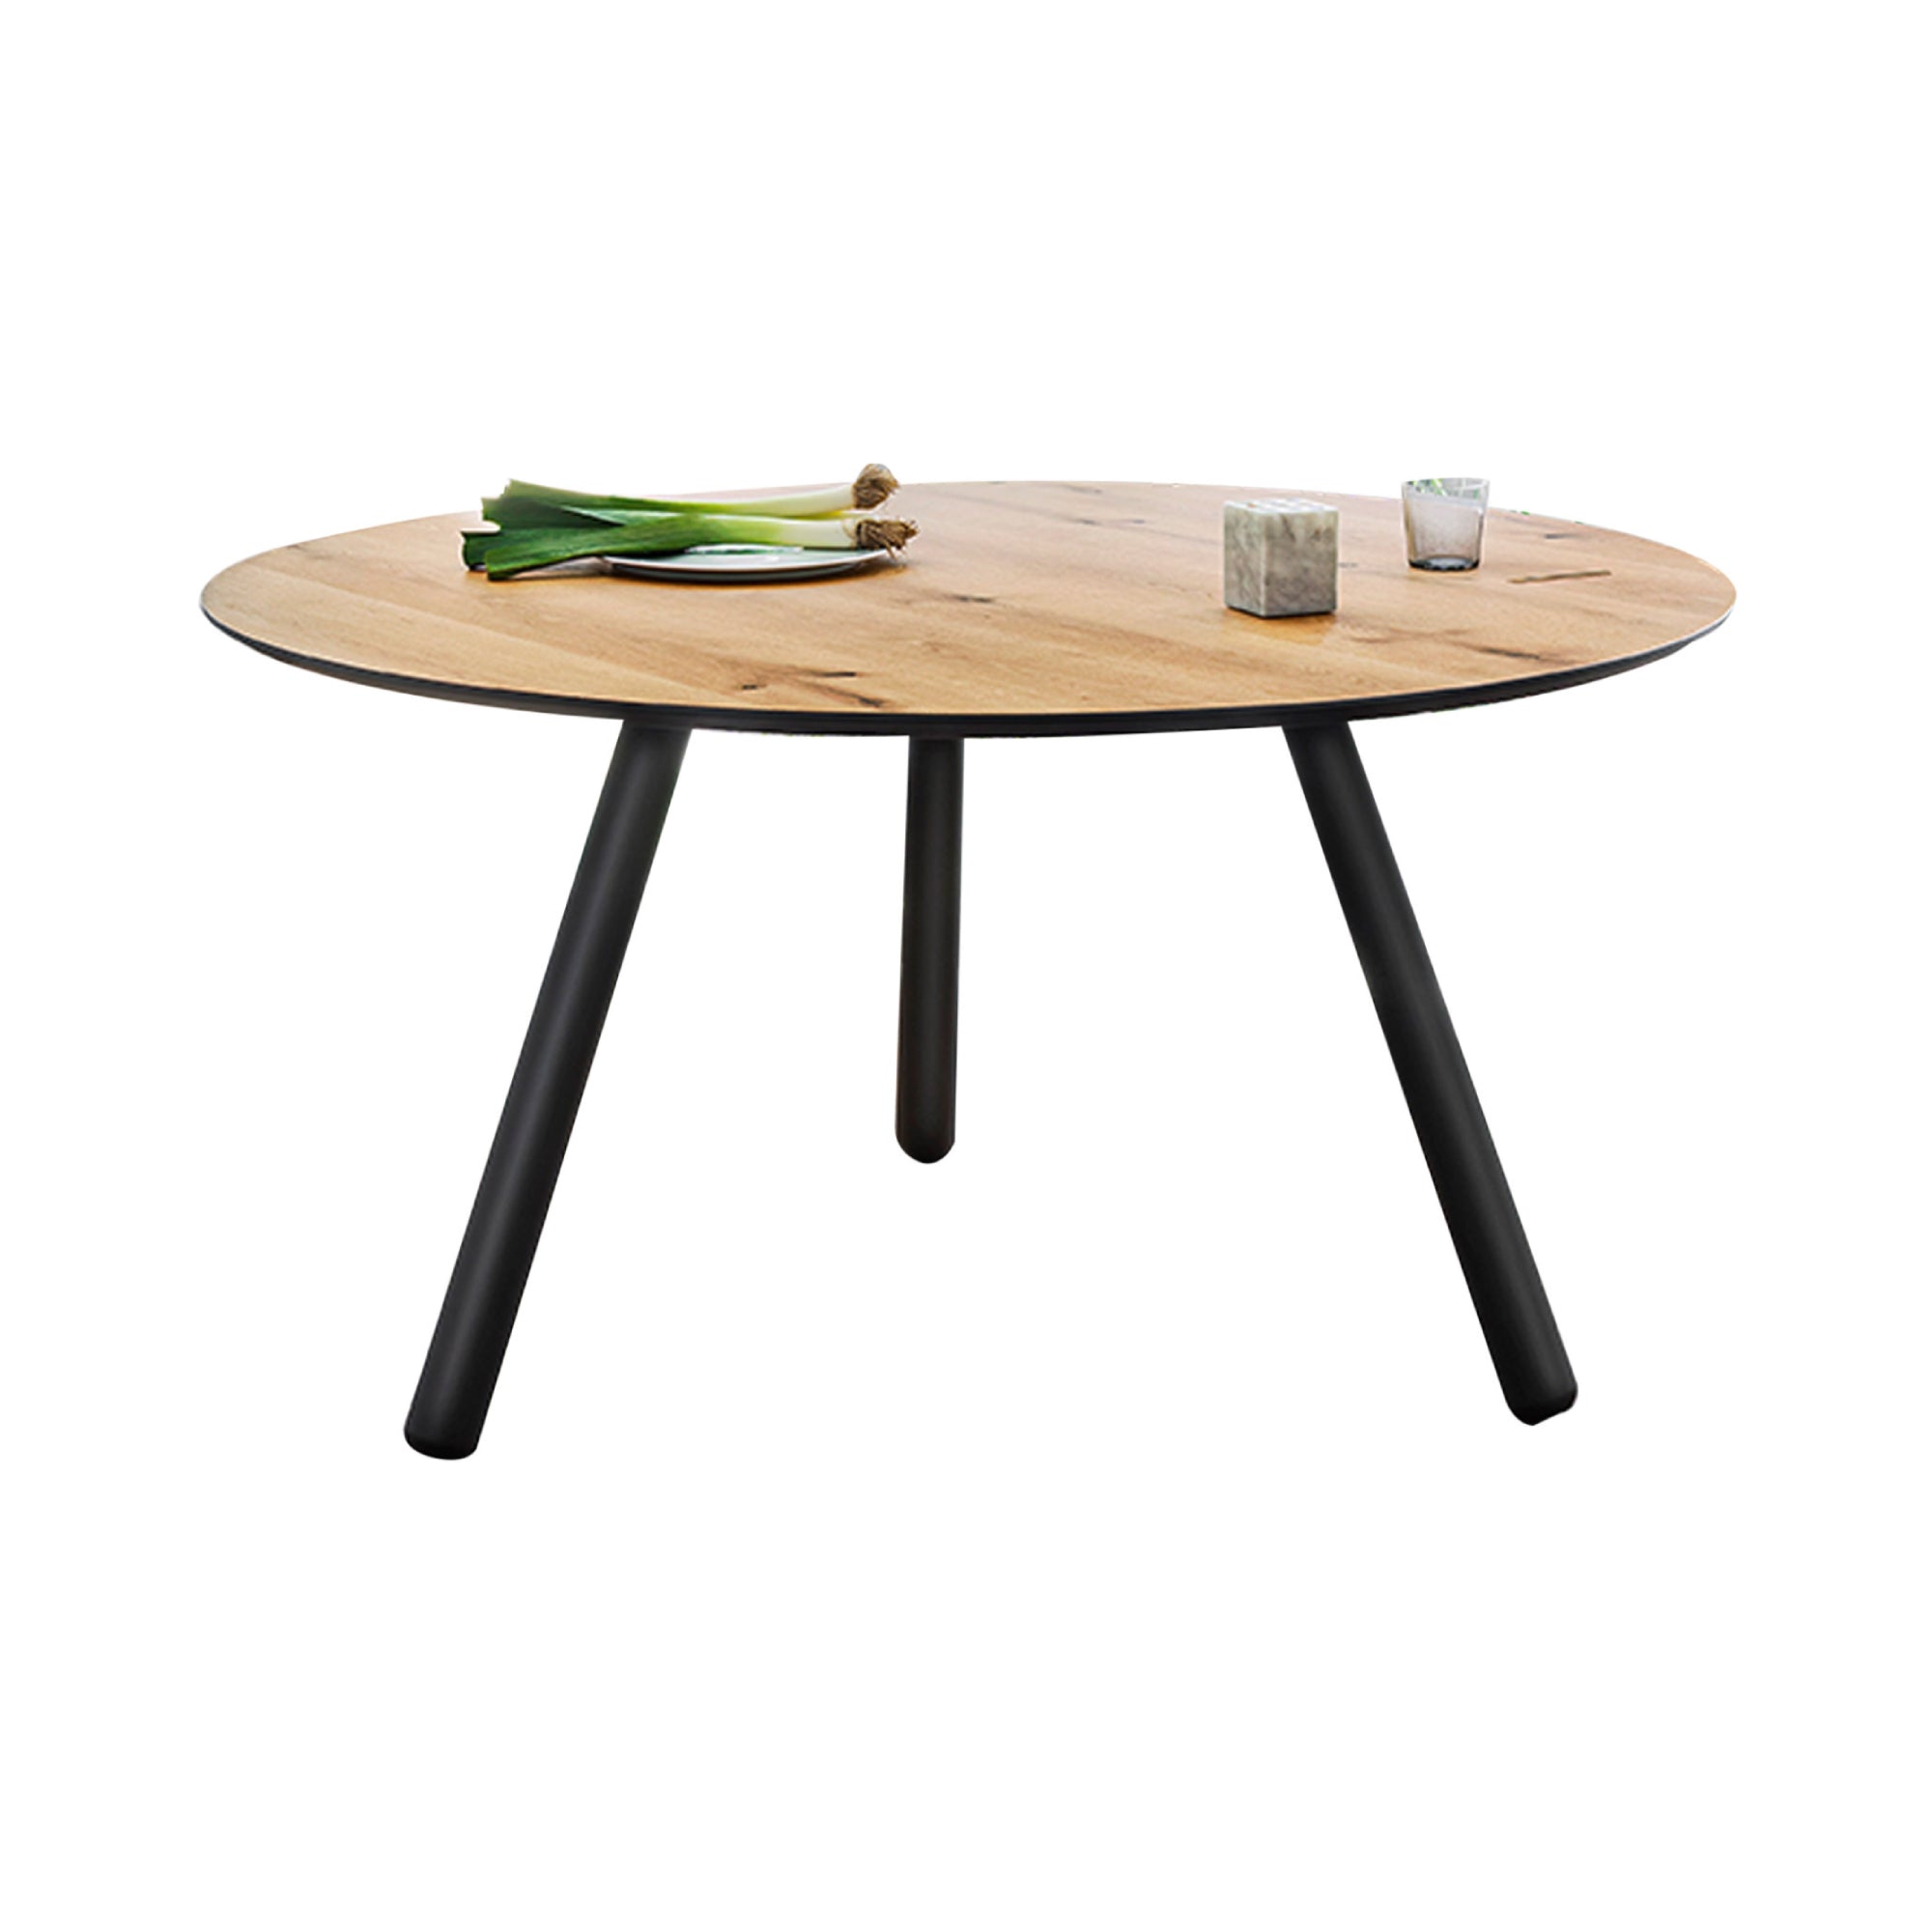 Pixie Round Table: Small + Vintage Oak + Lacquered Black